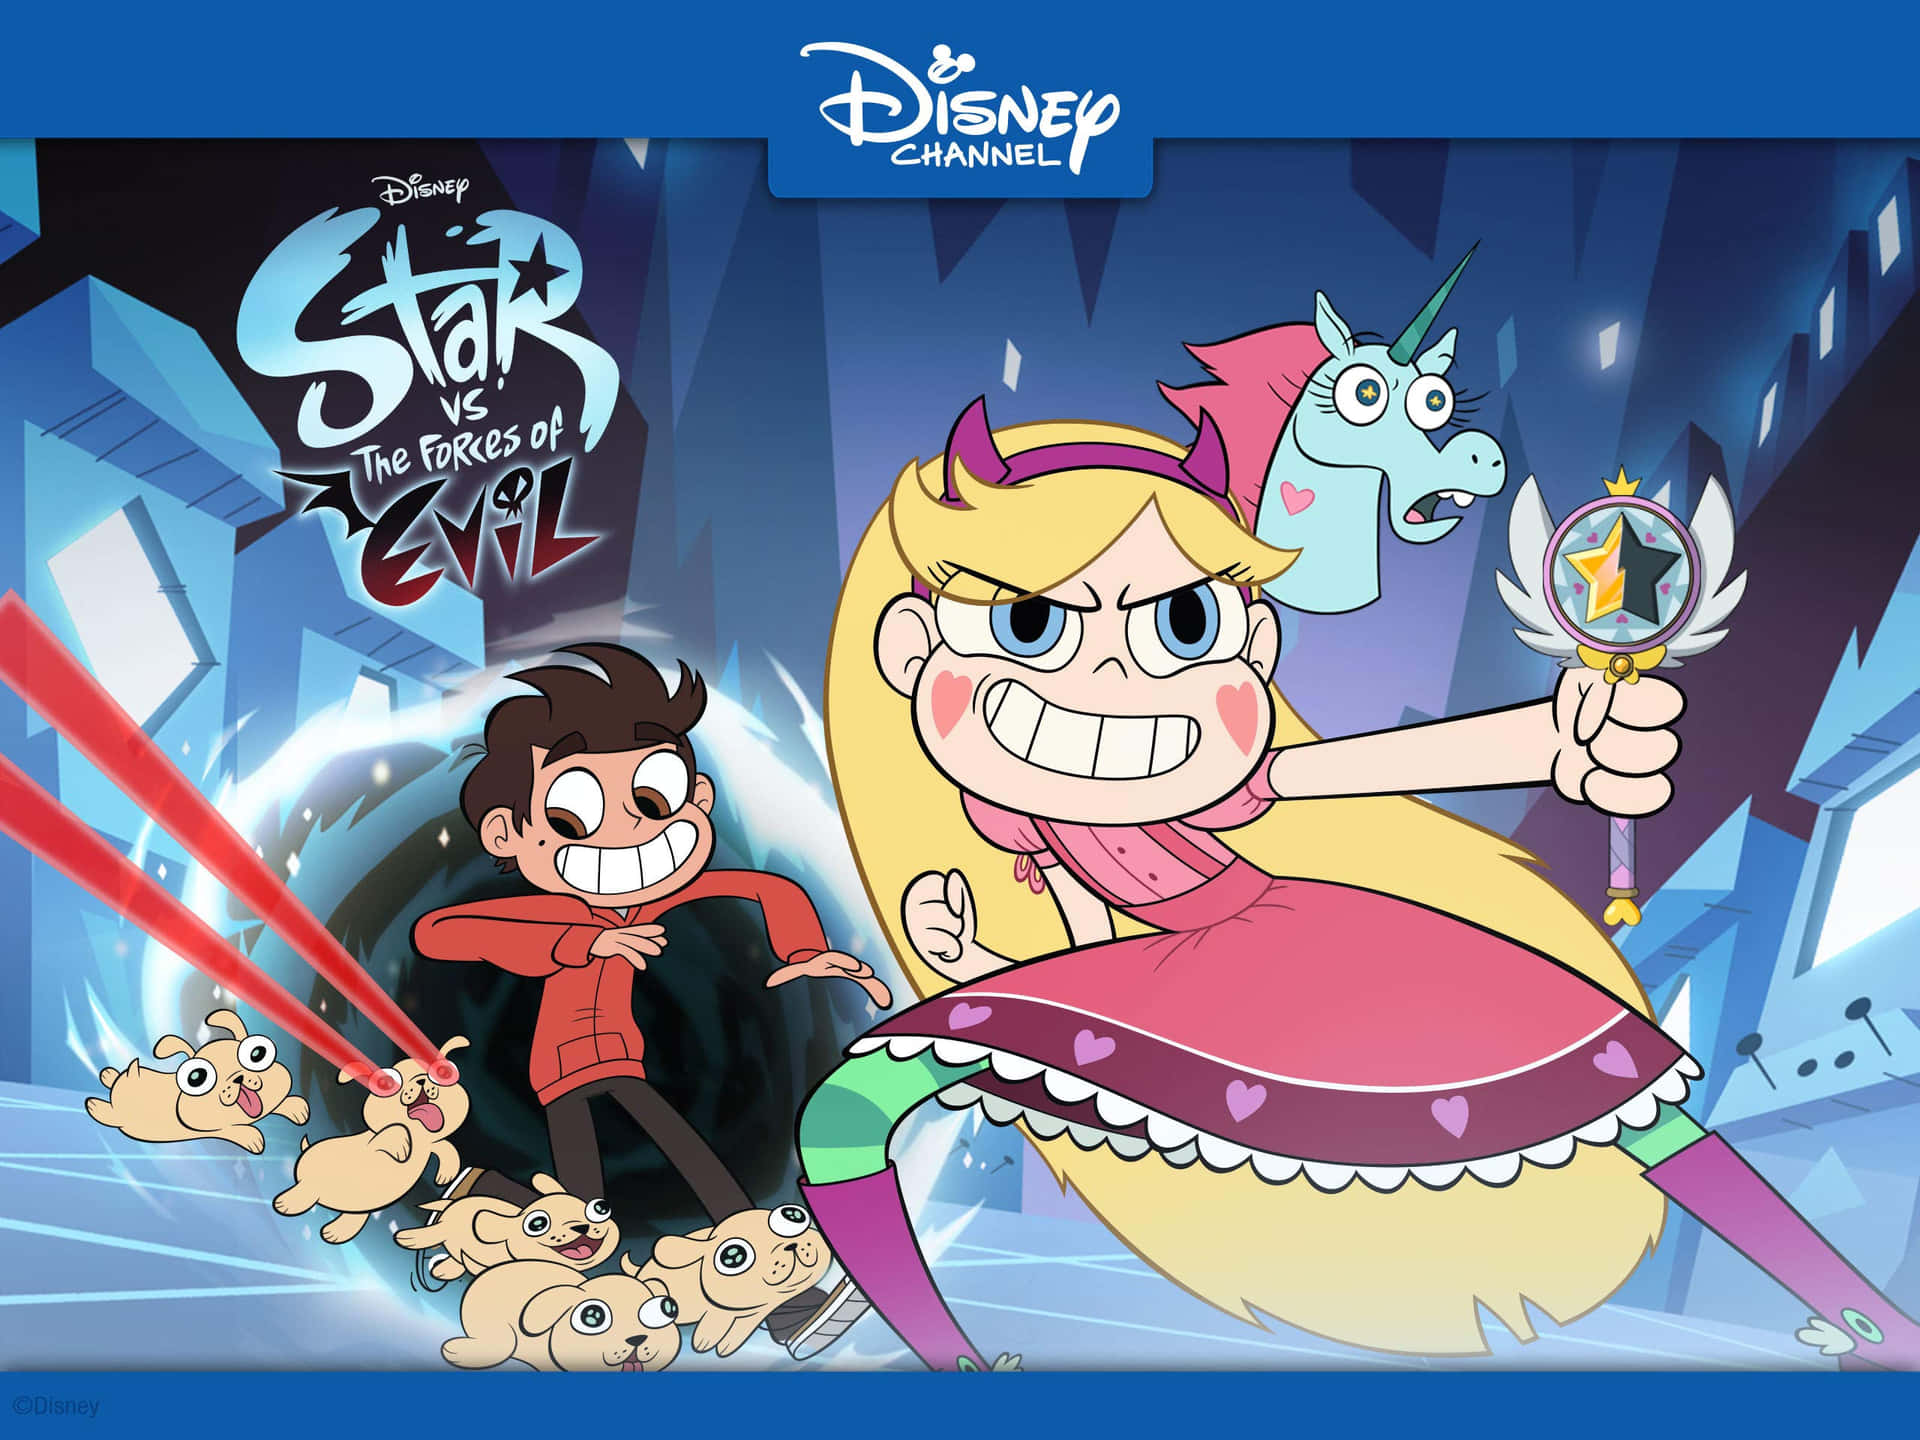 Get Ready For Some Fun-Filled Adventures With Star&Marco